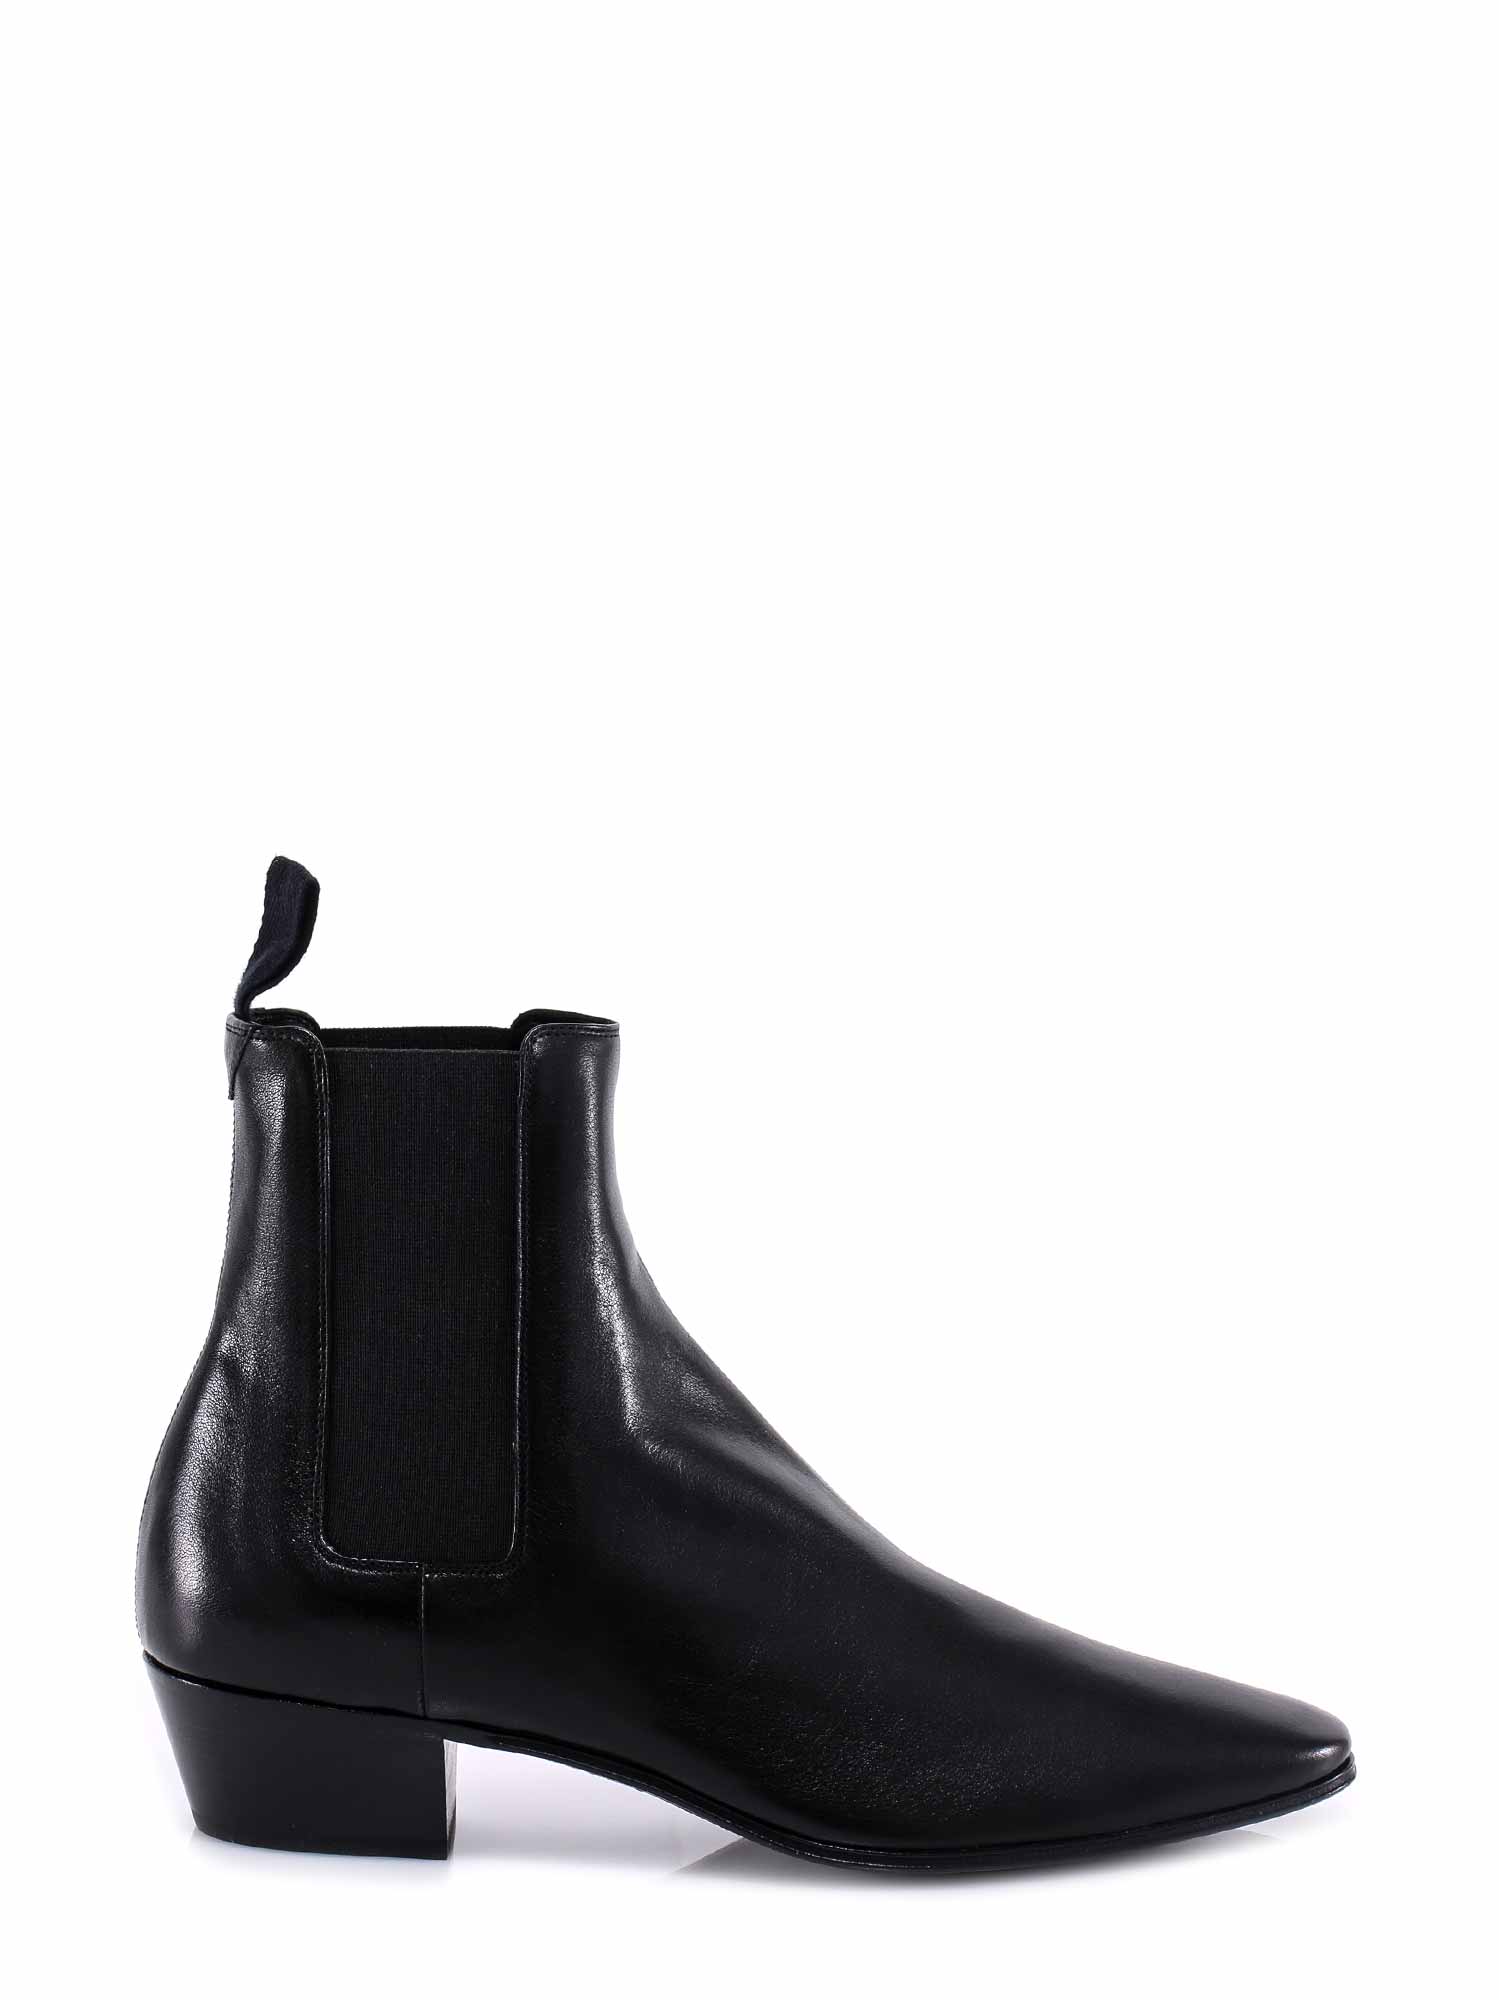 ysl ankle boots sale